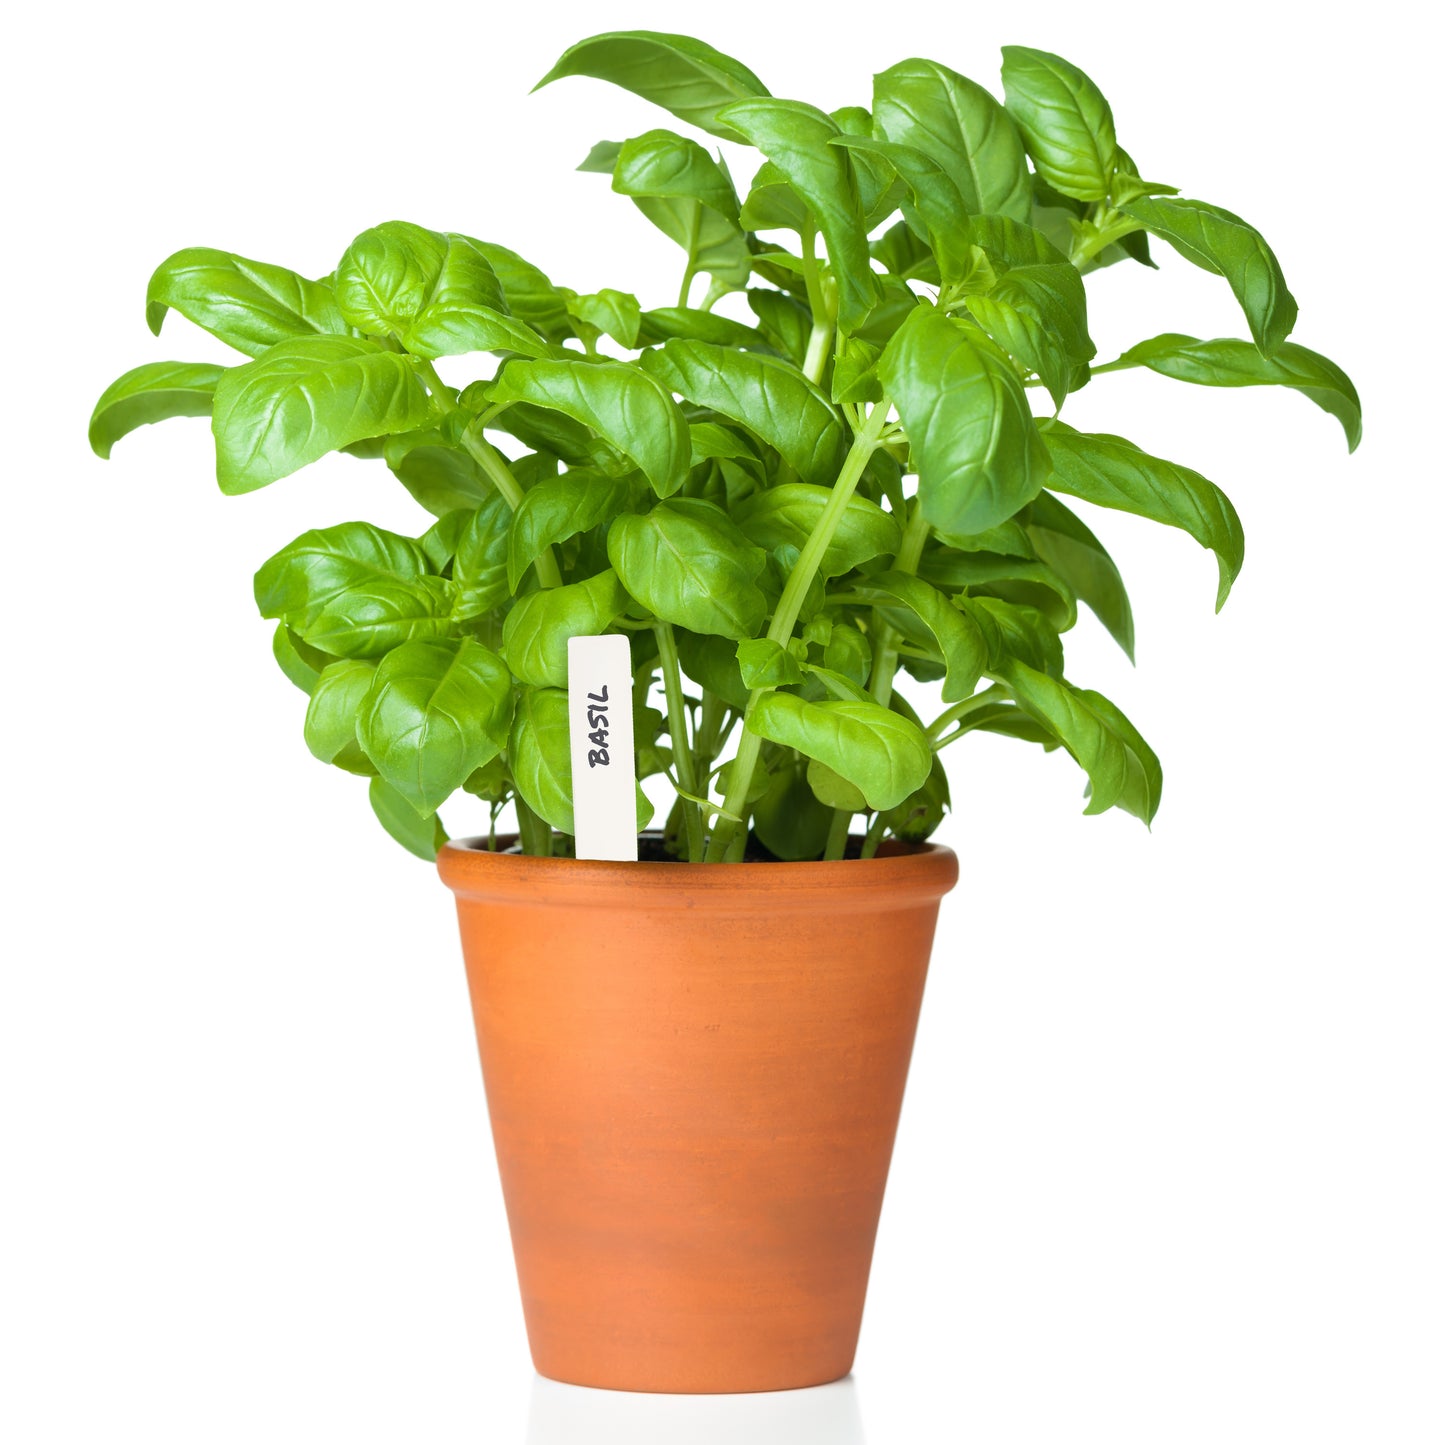 A picture of the 5 inch reusable plant marker in use, tucked inside of a basil plant container.